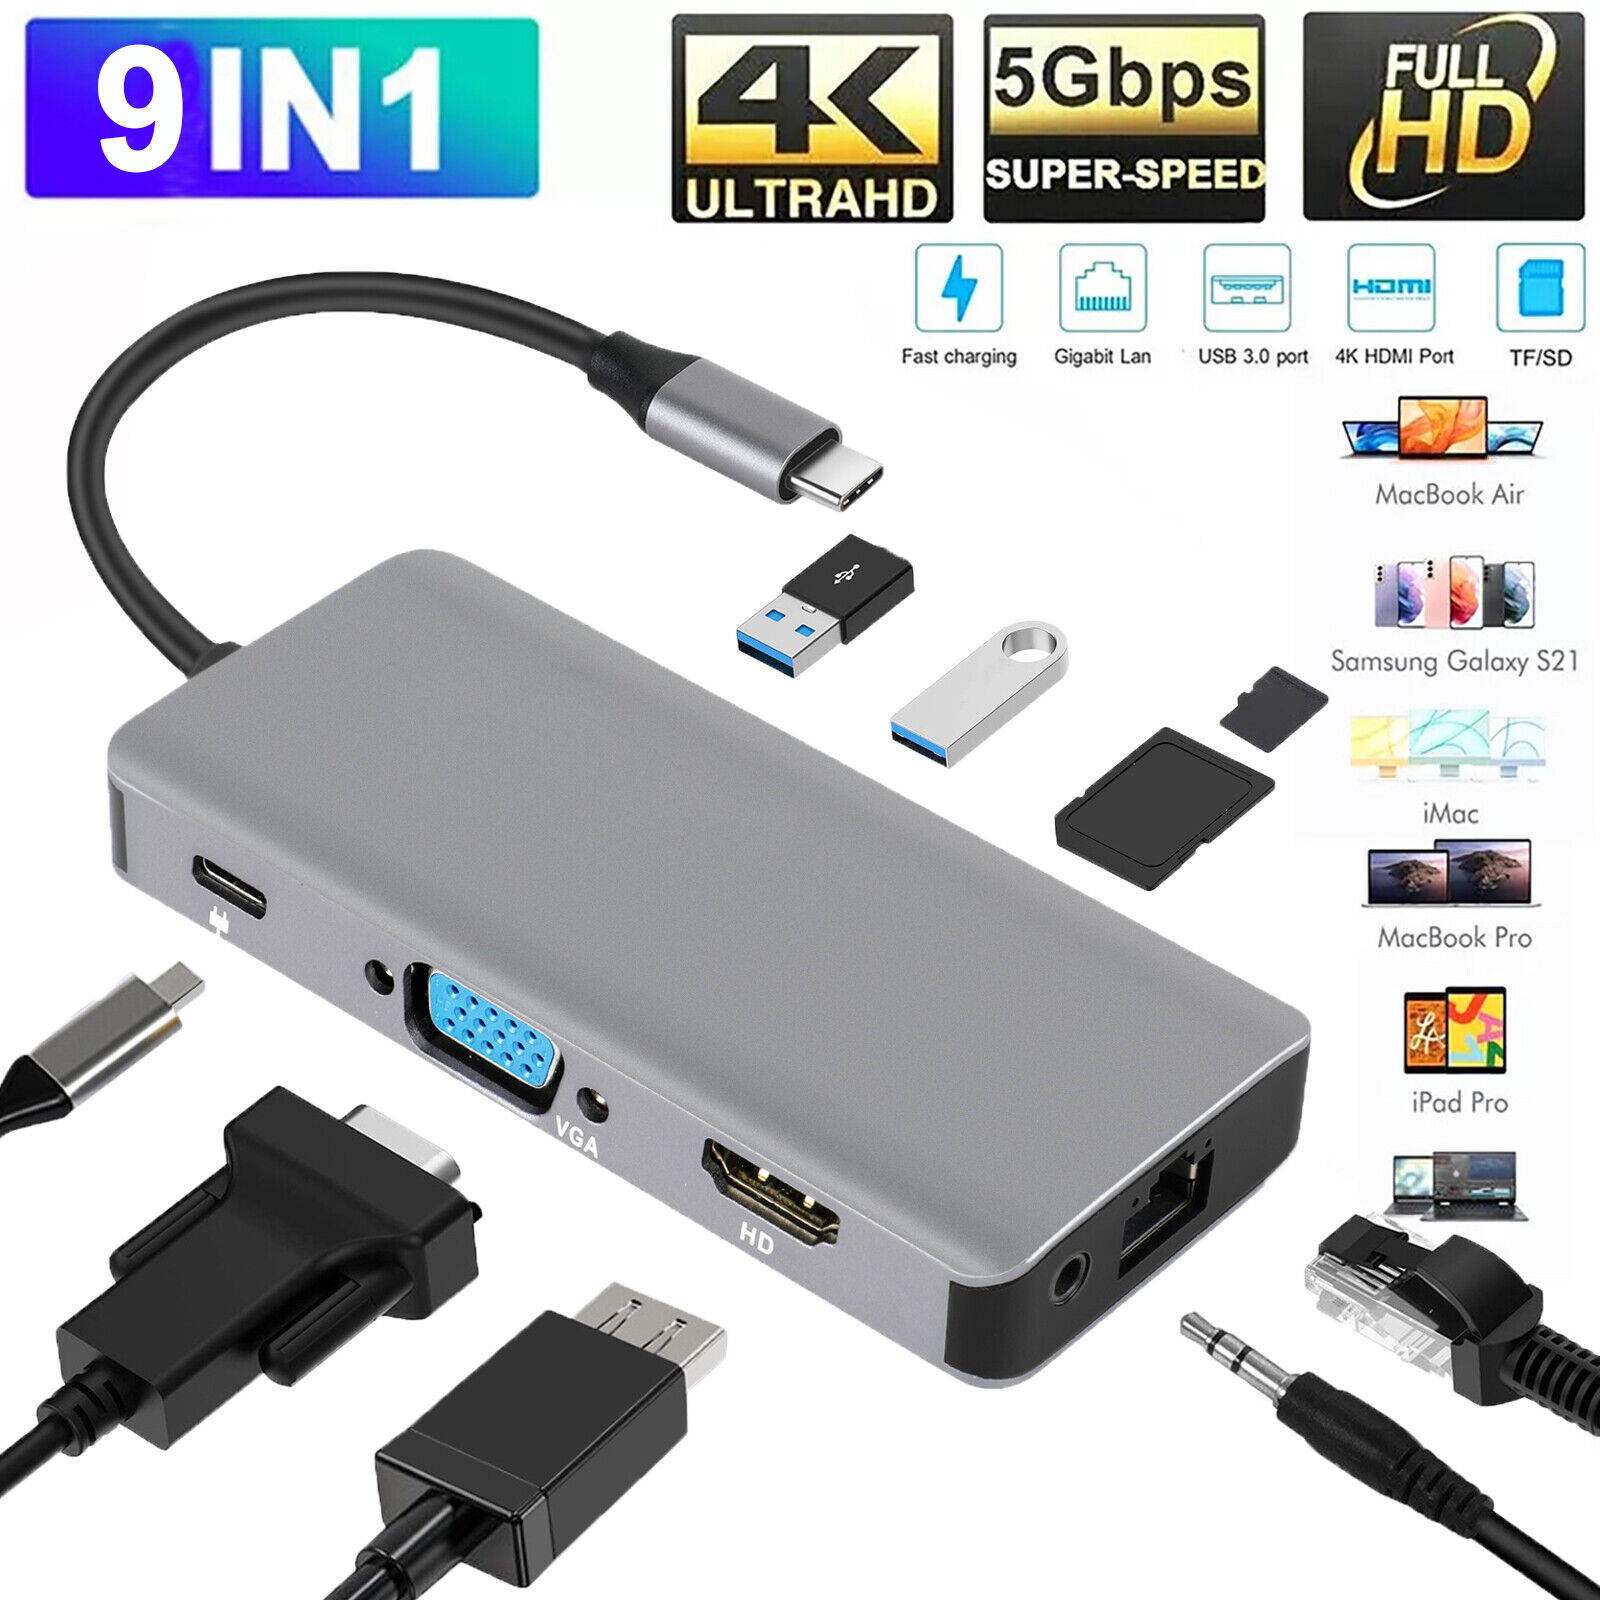 9 in 1 Multiport HUB Type-C to 4K HDMI VGA USB 3.0 Adapter for PC Laptop Macbook